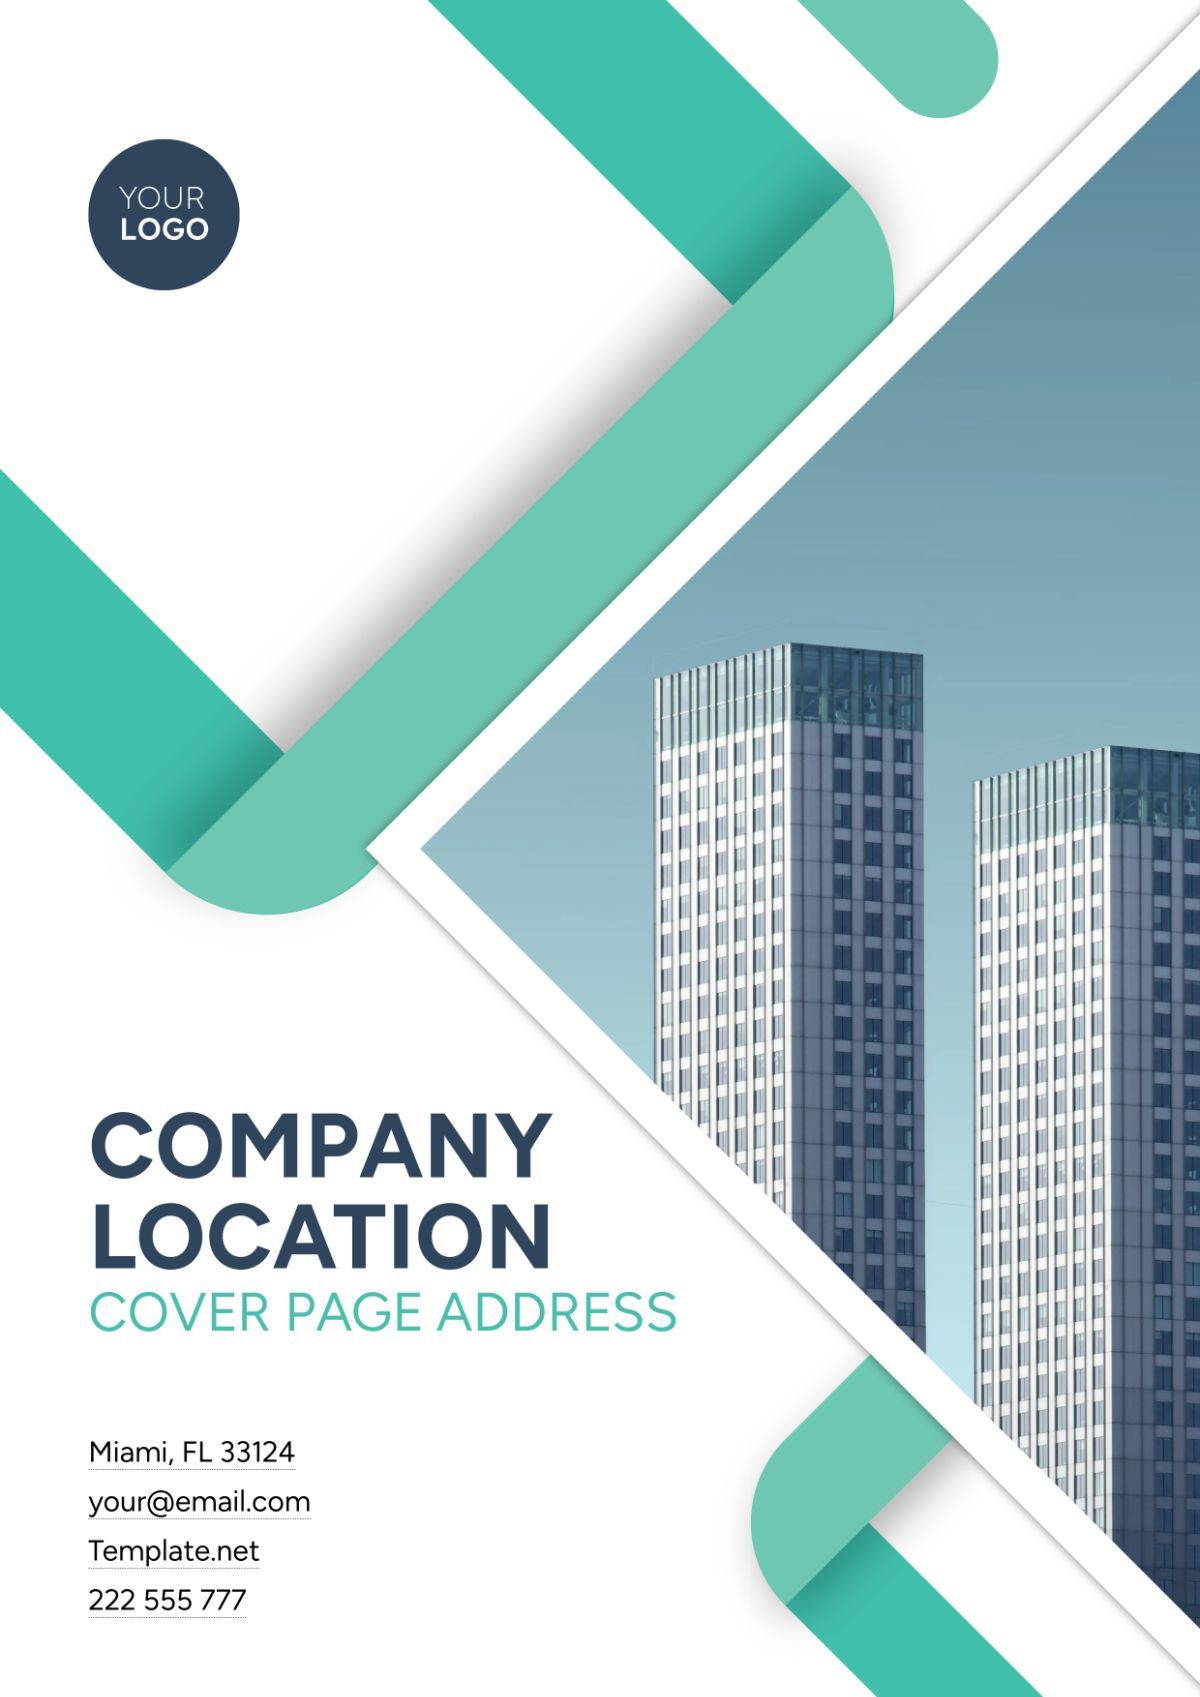 Company Location Cover Page Address Template